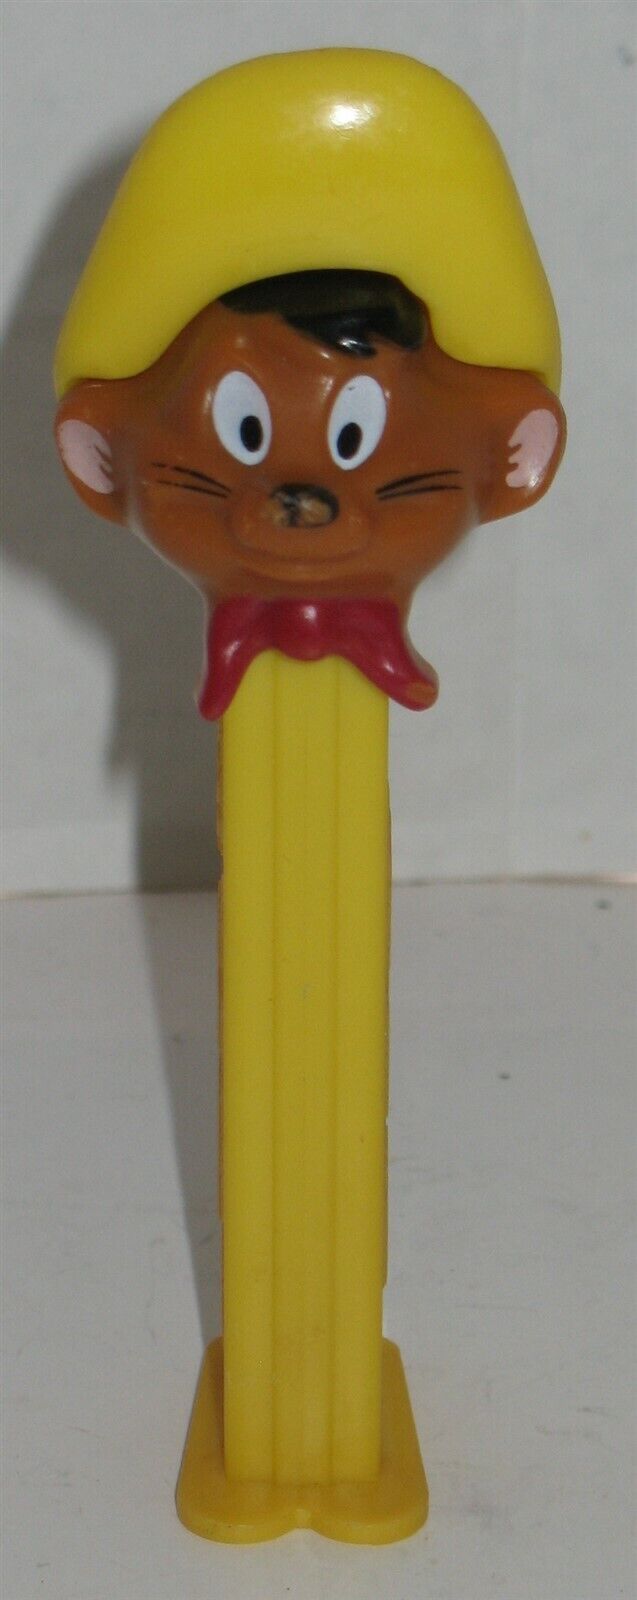 1995 Speedy Gonzales Warner Bros Pez Dispenser Footed Free Ship Made in Hungary